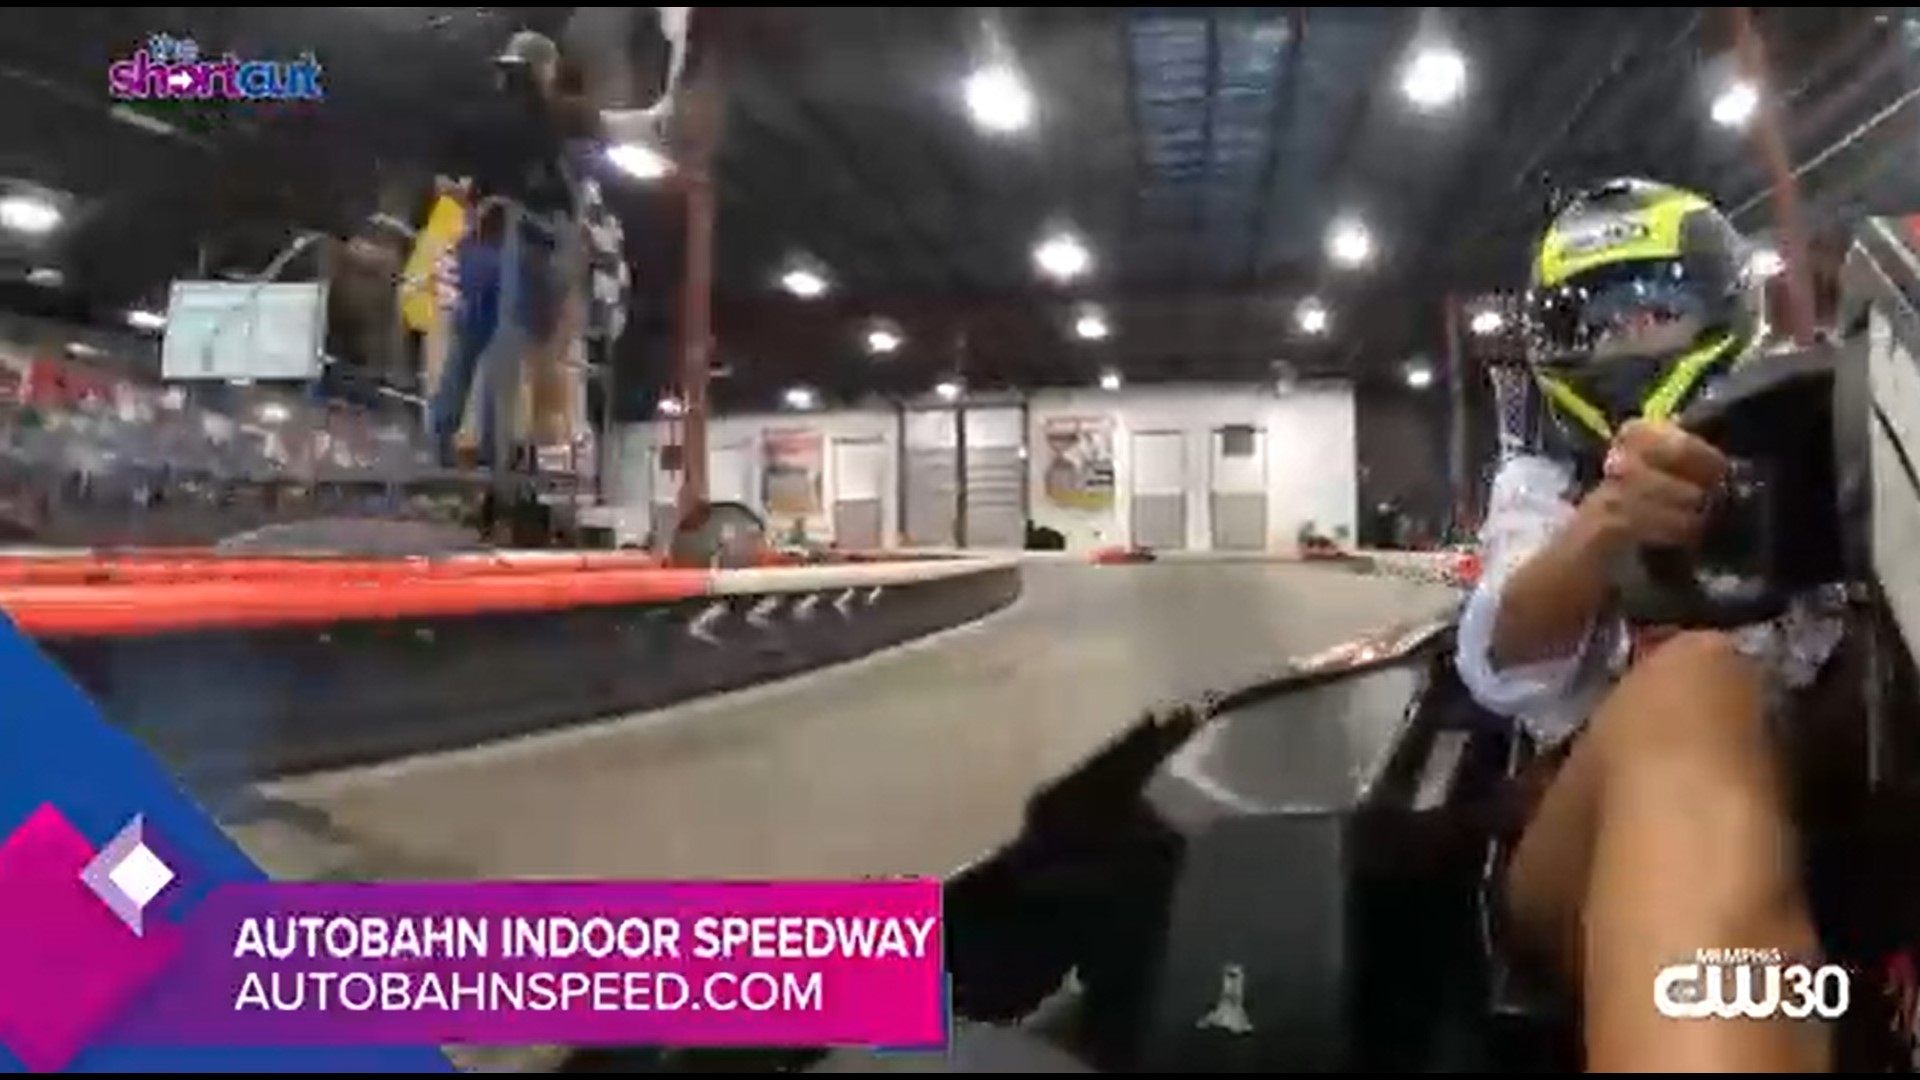 Whether you feel the need for speed and/or releasing unwanted tension, check out what Autobahn Indoor Speedway has to offer on this week's "The Shortcut!"